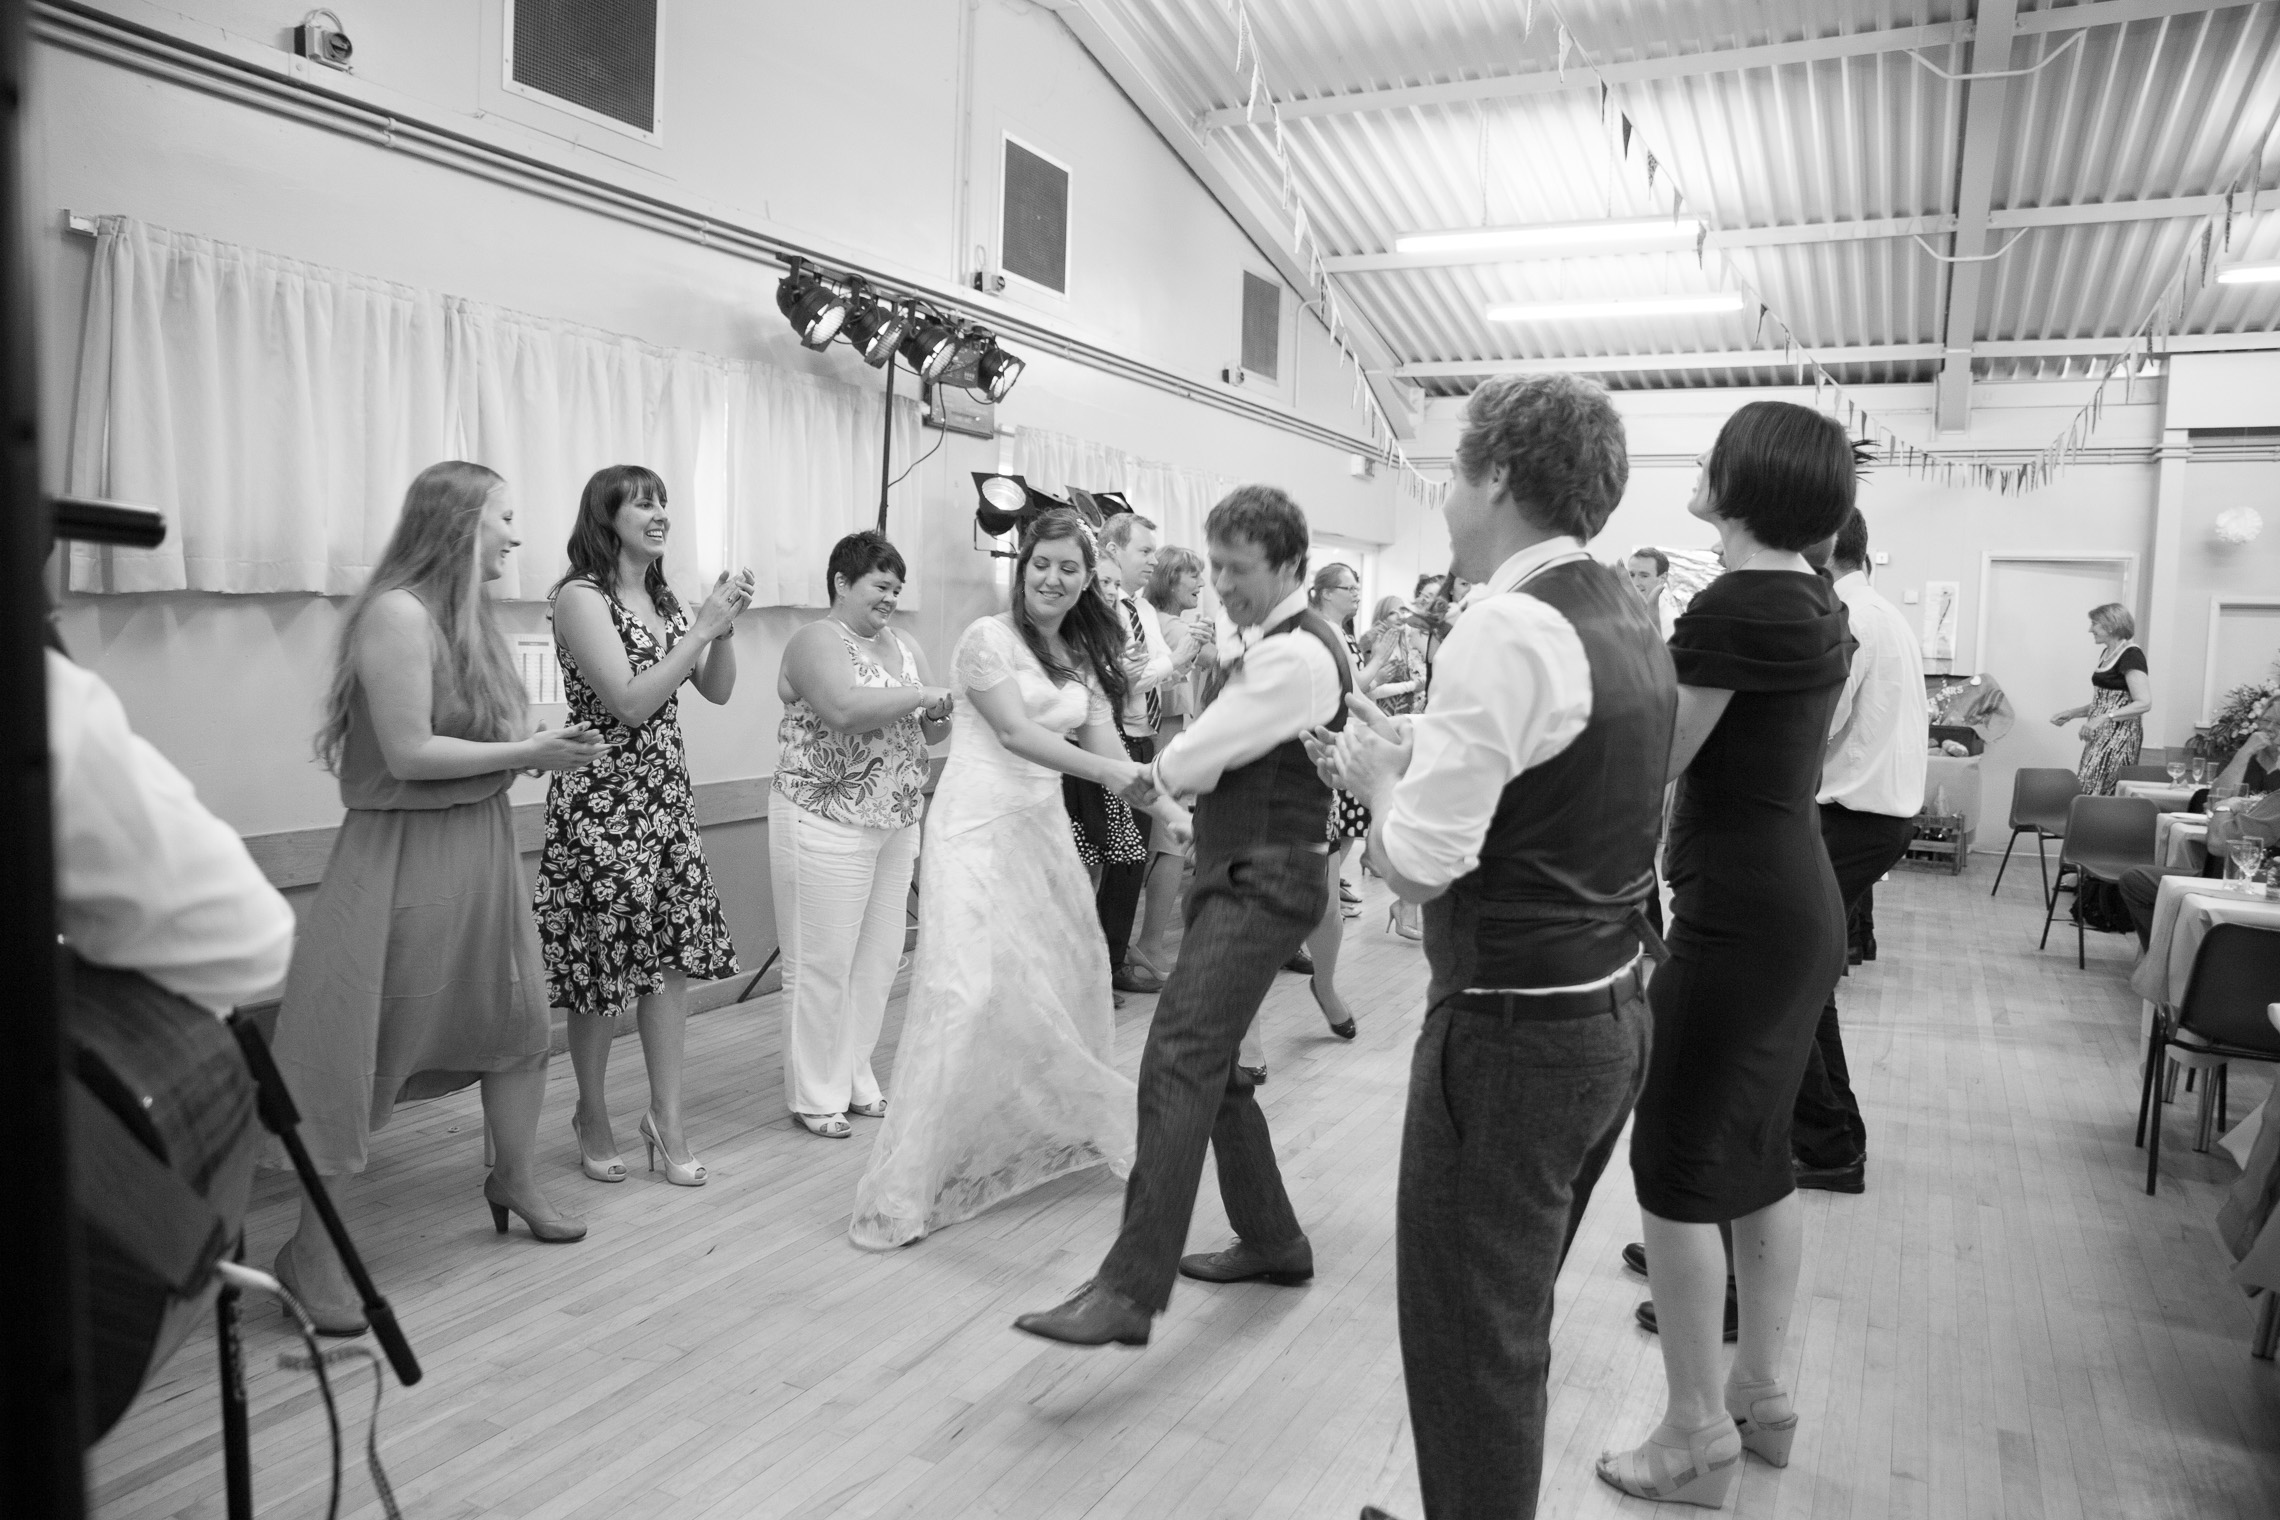 Ceilidh dancing for the bride and groom